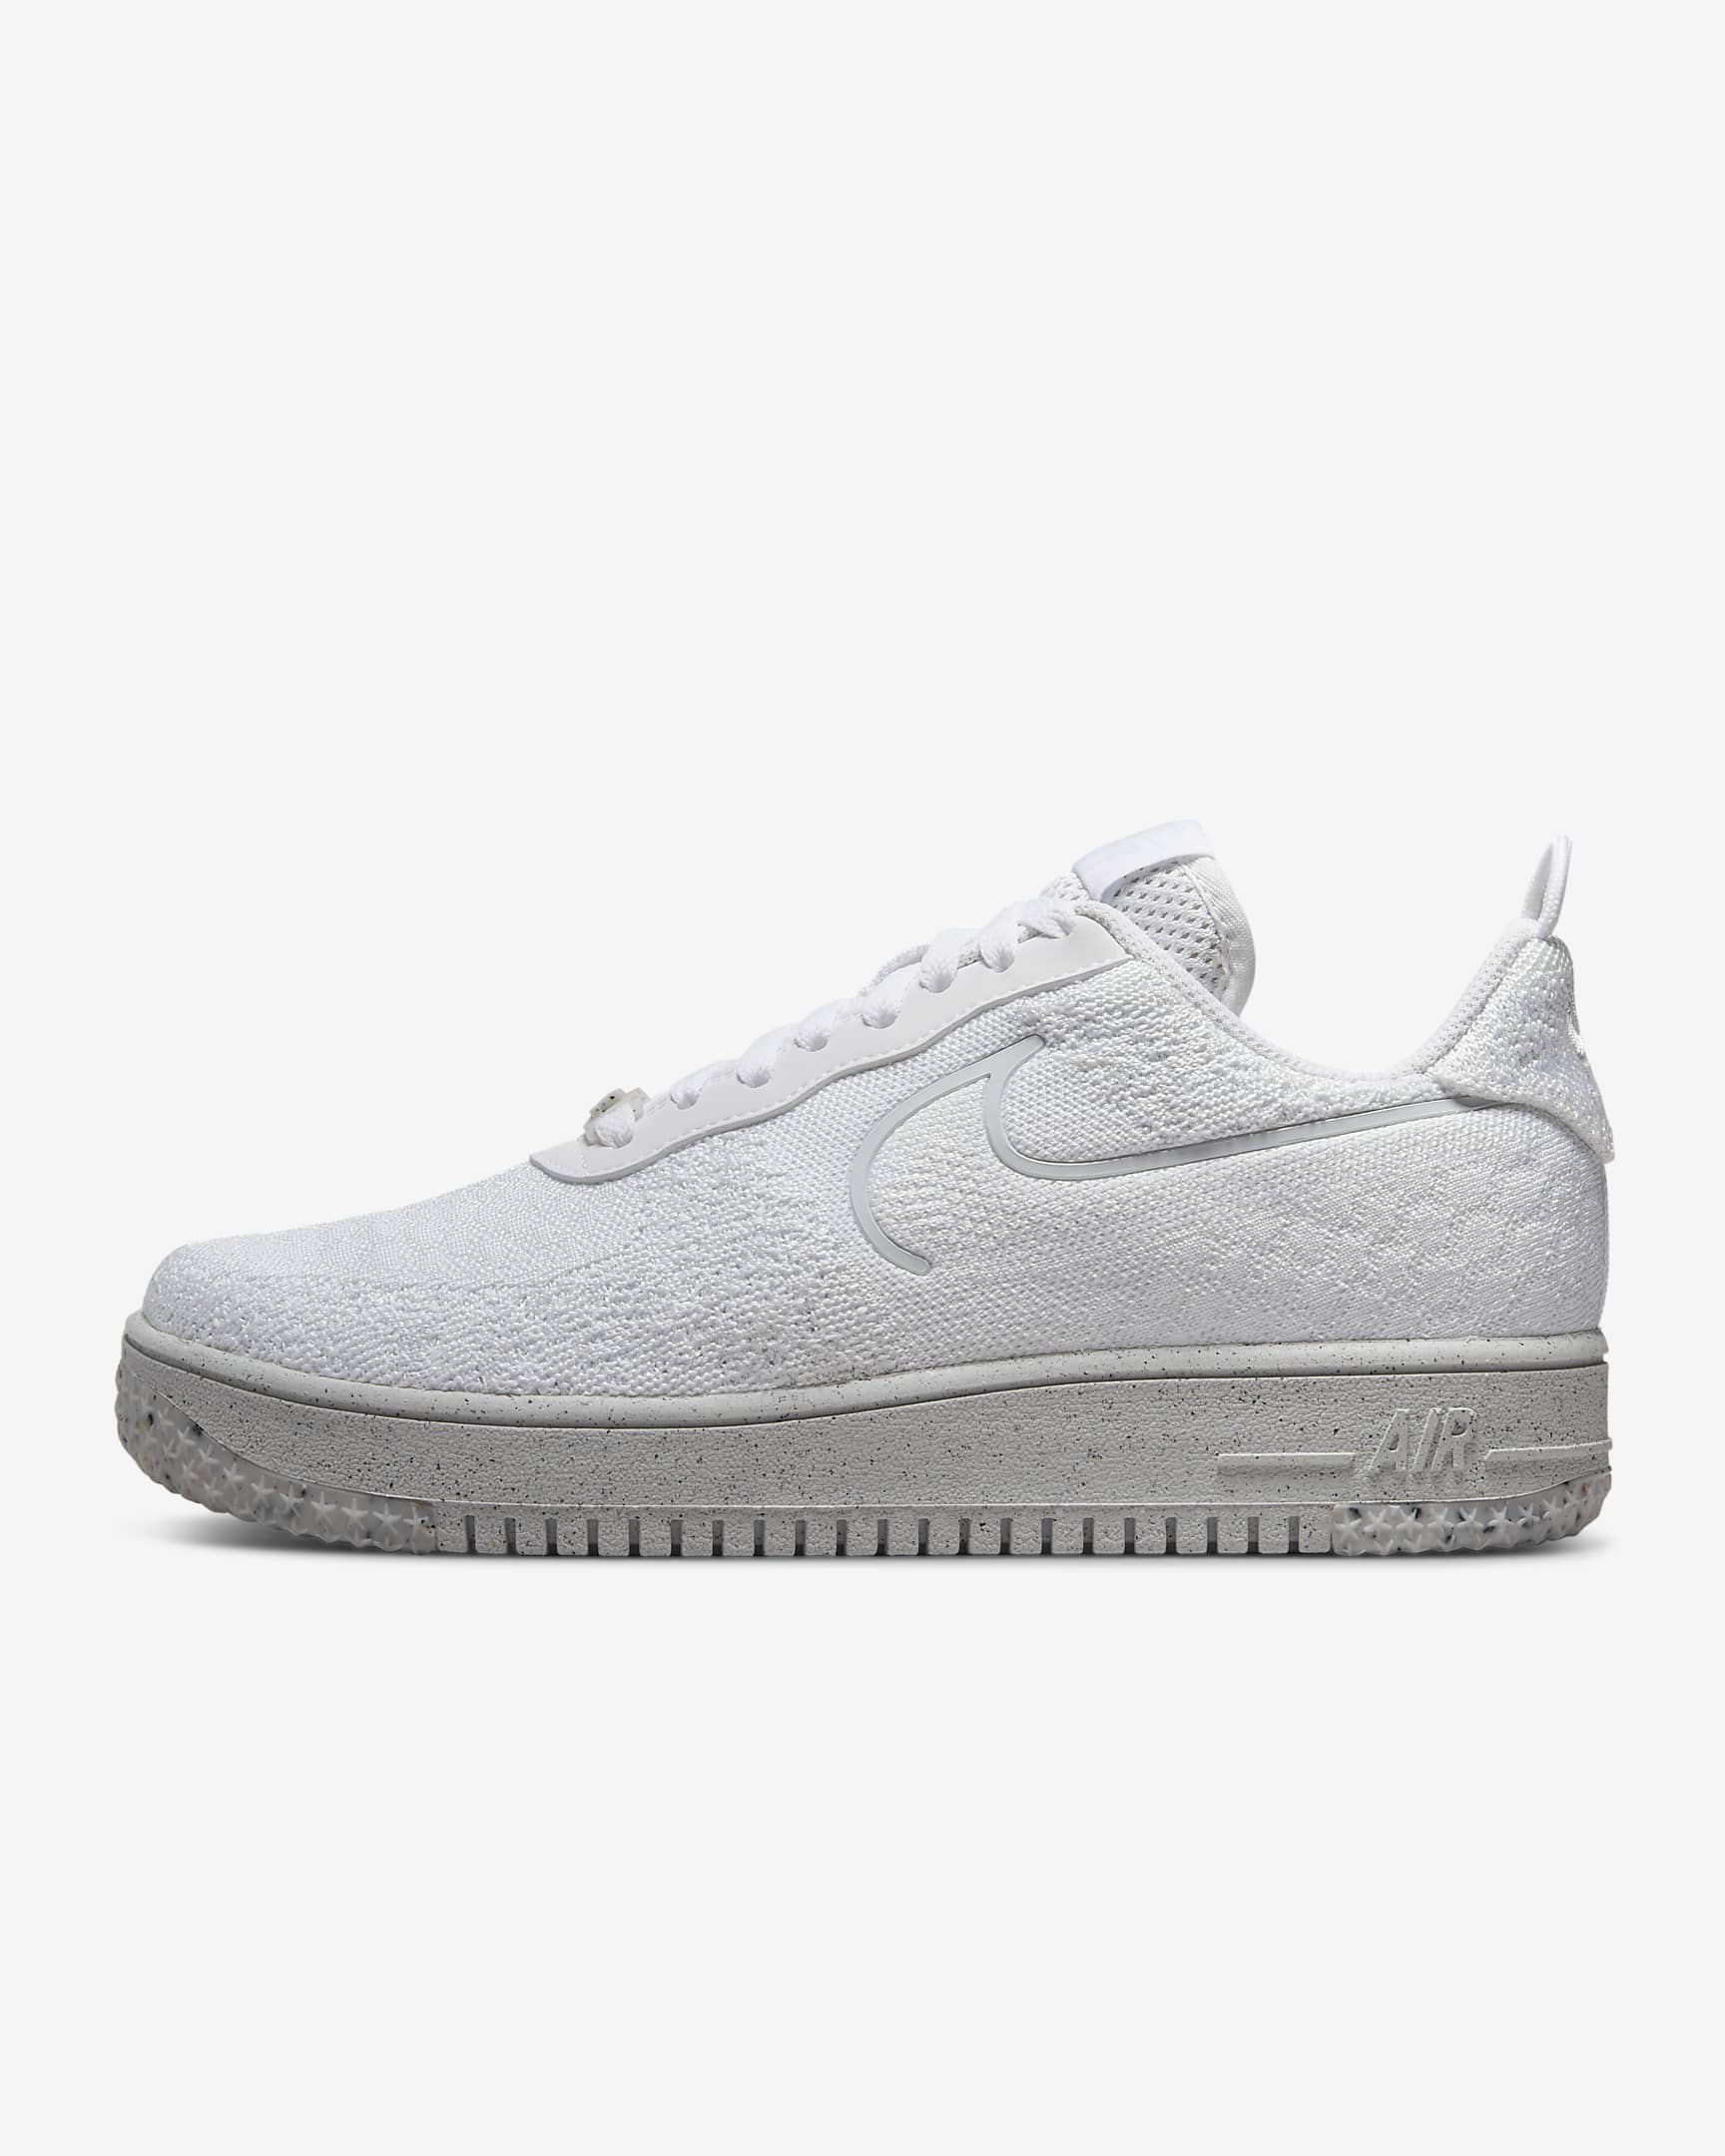 Nike Air Force 1 Crater Flyknit Next Nature Men's Shoes. Nike IL